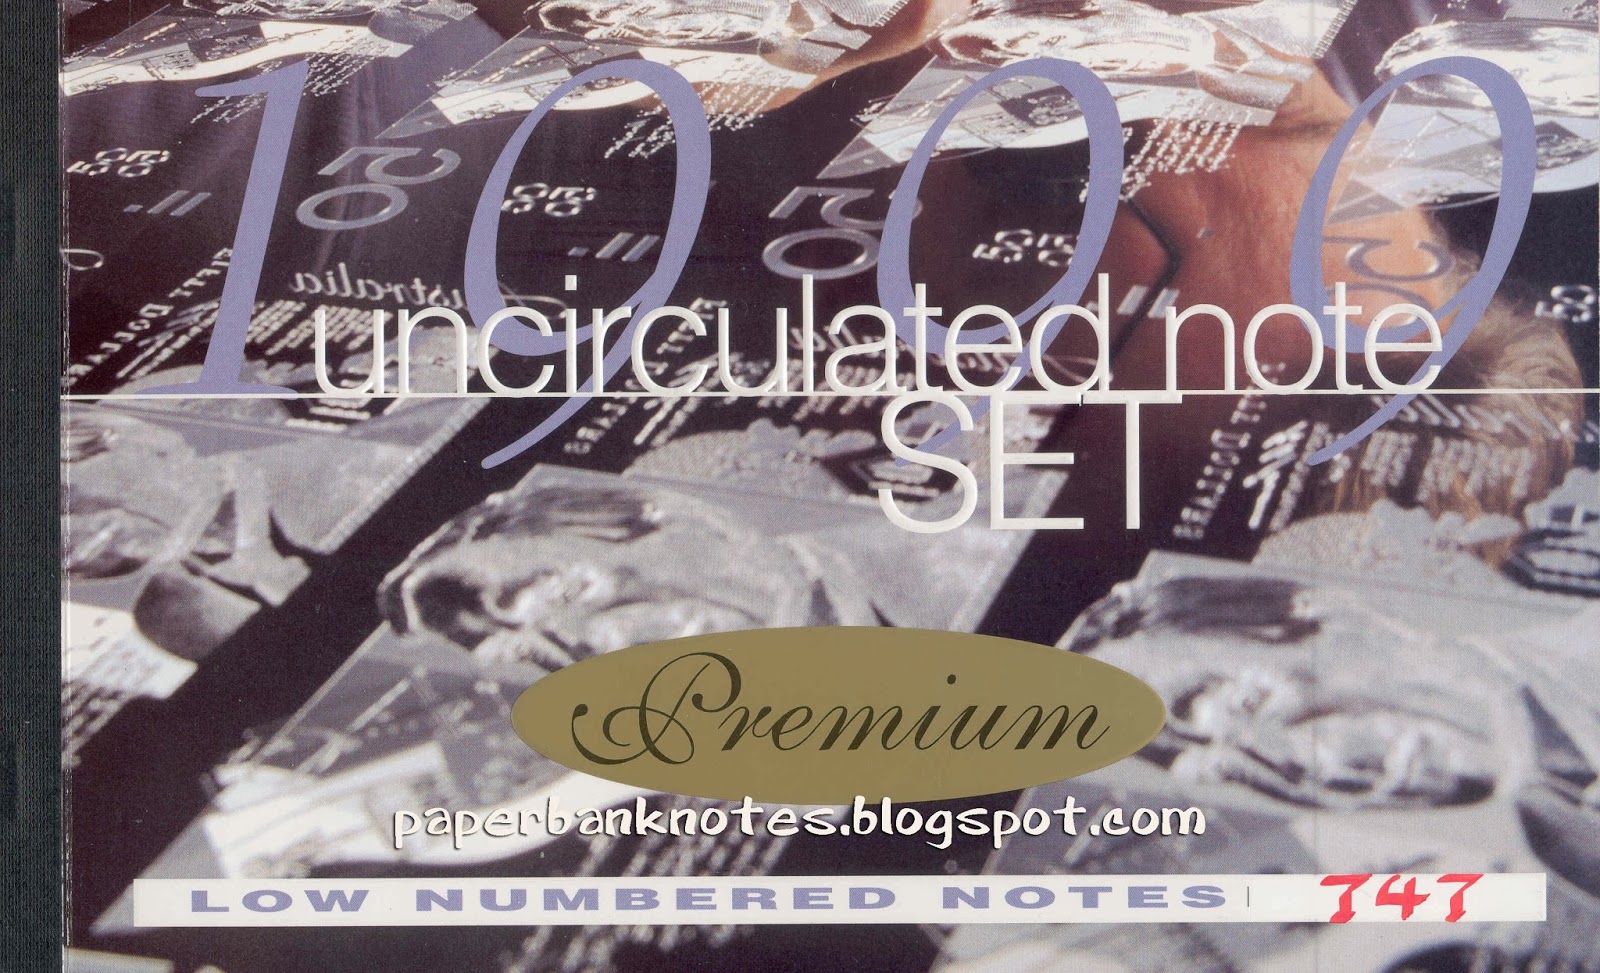 http://australiapolymernotes.blogspot.com/2014/05/1999-annual-premium-red-serial-numbers.html